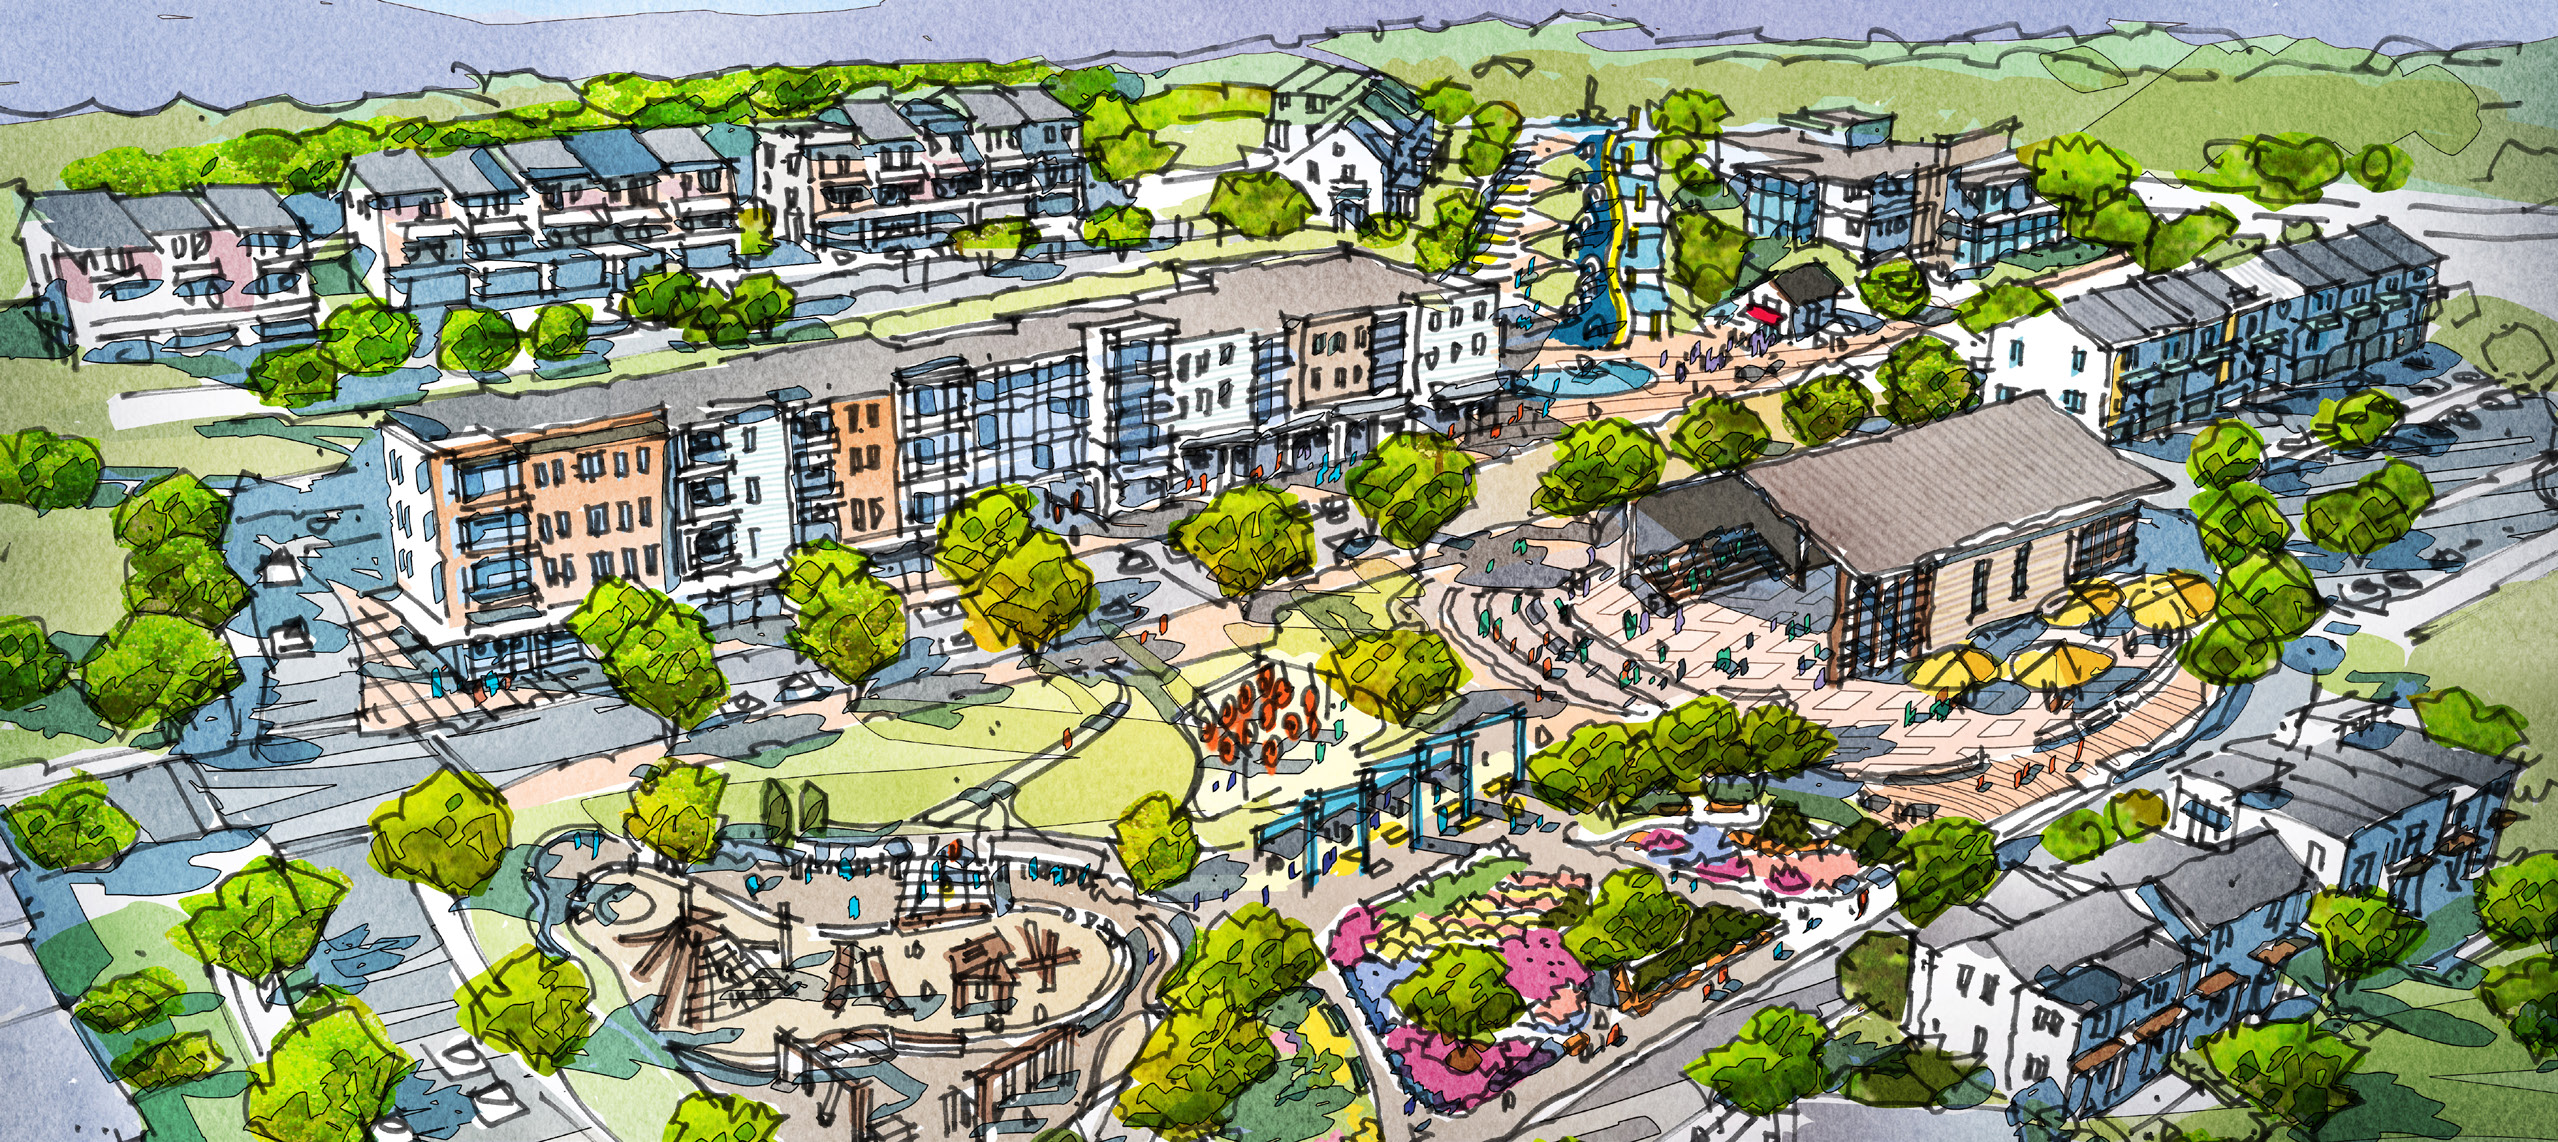 Featured image for “KCDC to show Transforming Western plan at Jan. 19 open house”